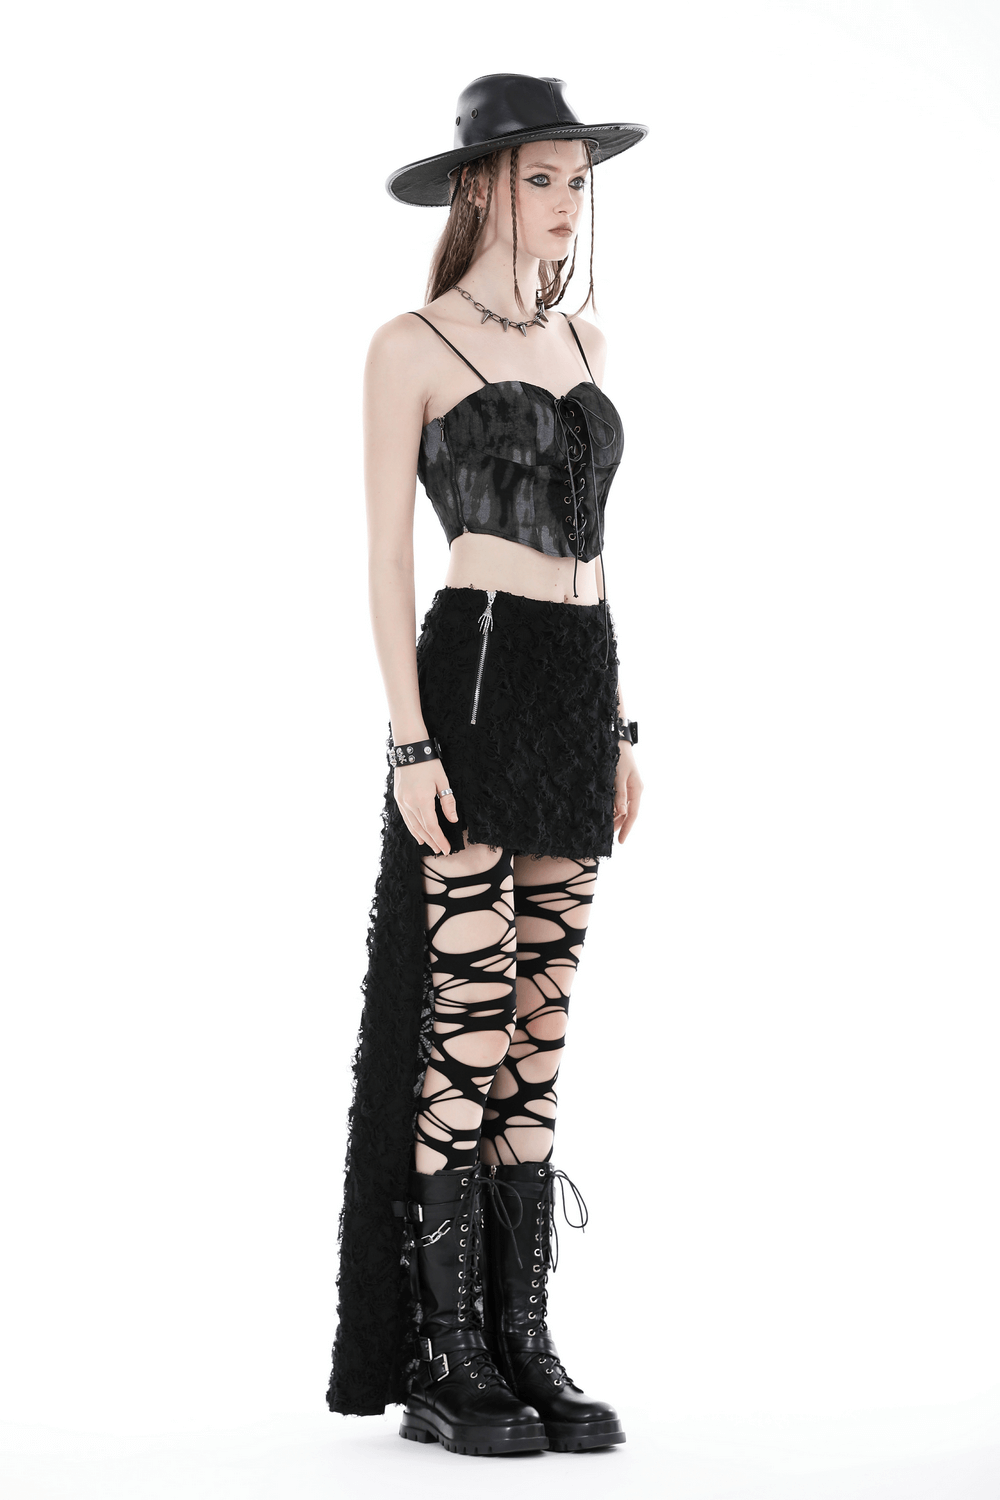 High-Low Lace Skirt with Side Zipper - Dark Gothic Punk